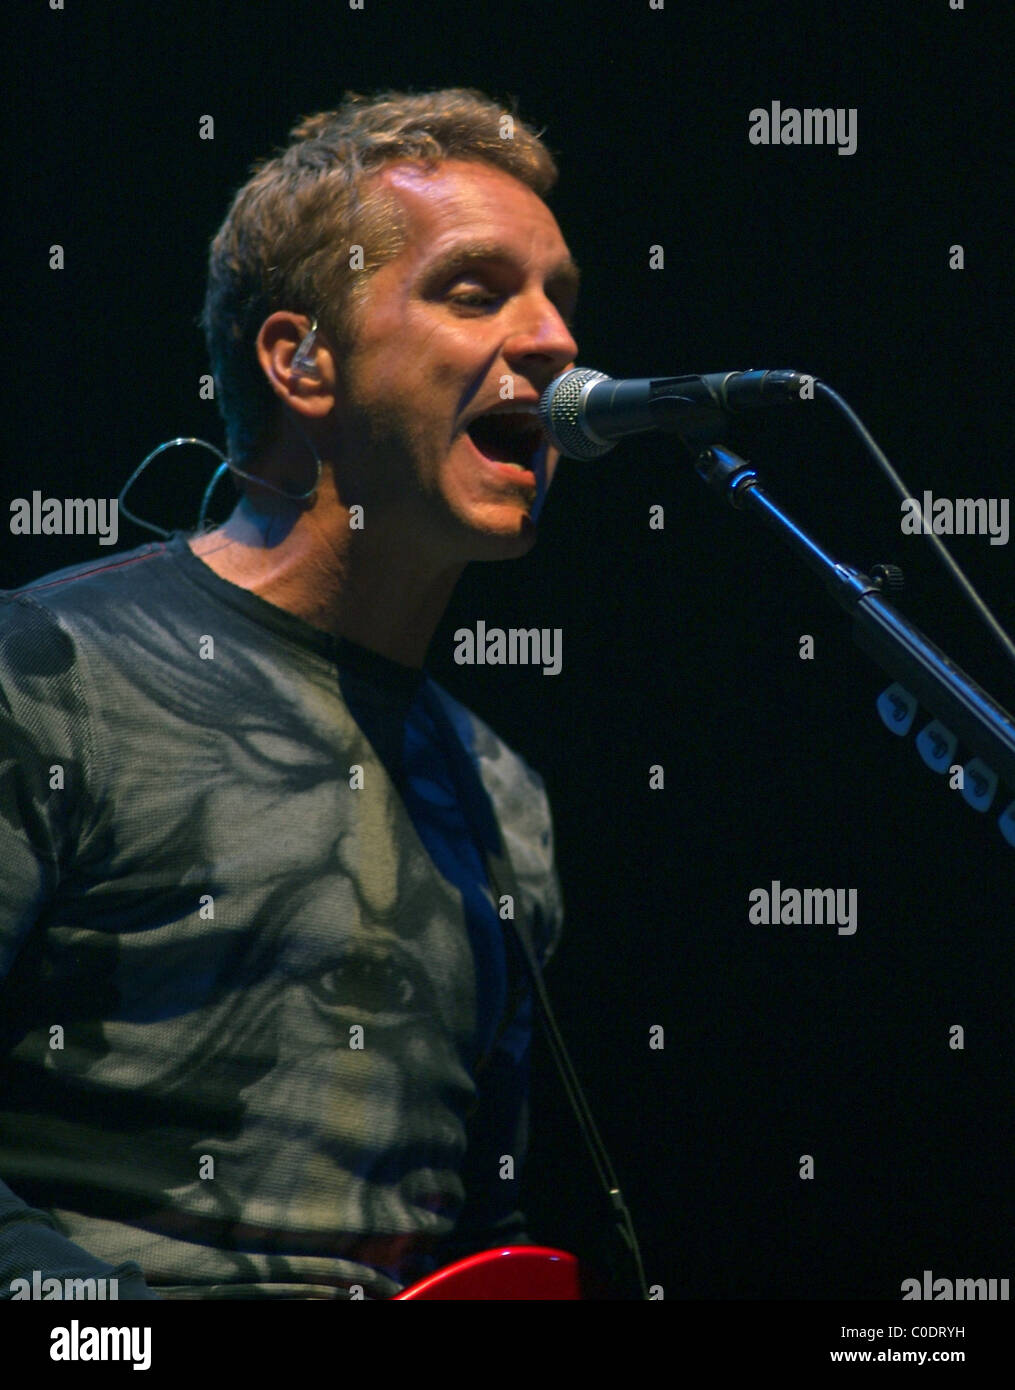 Keith Howland of Chicago  performs at Hard Rock Live  Hollywood, Florida - 04.05.06 Stock Photo